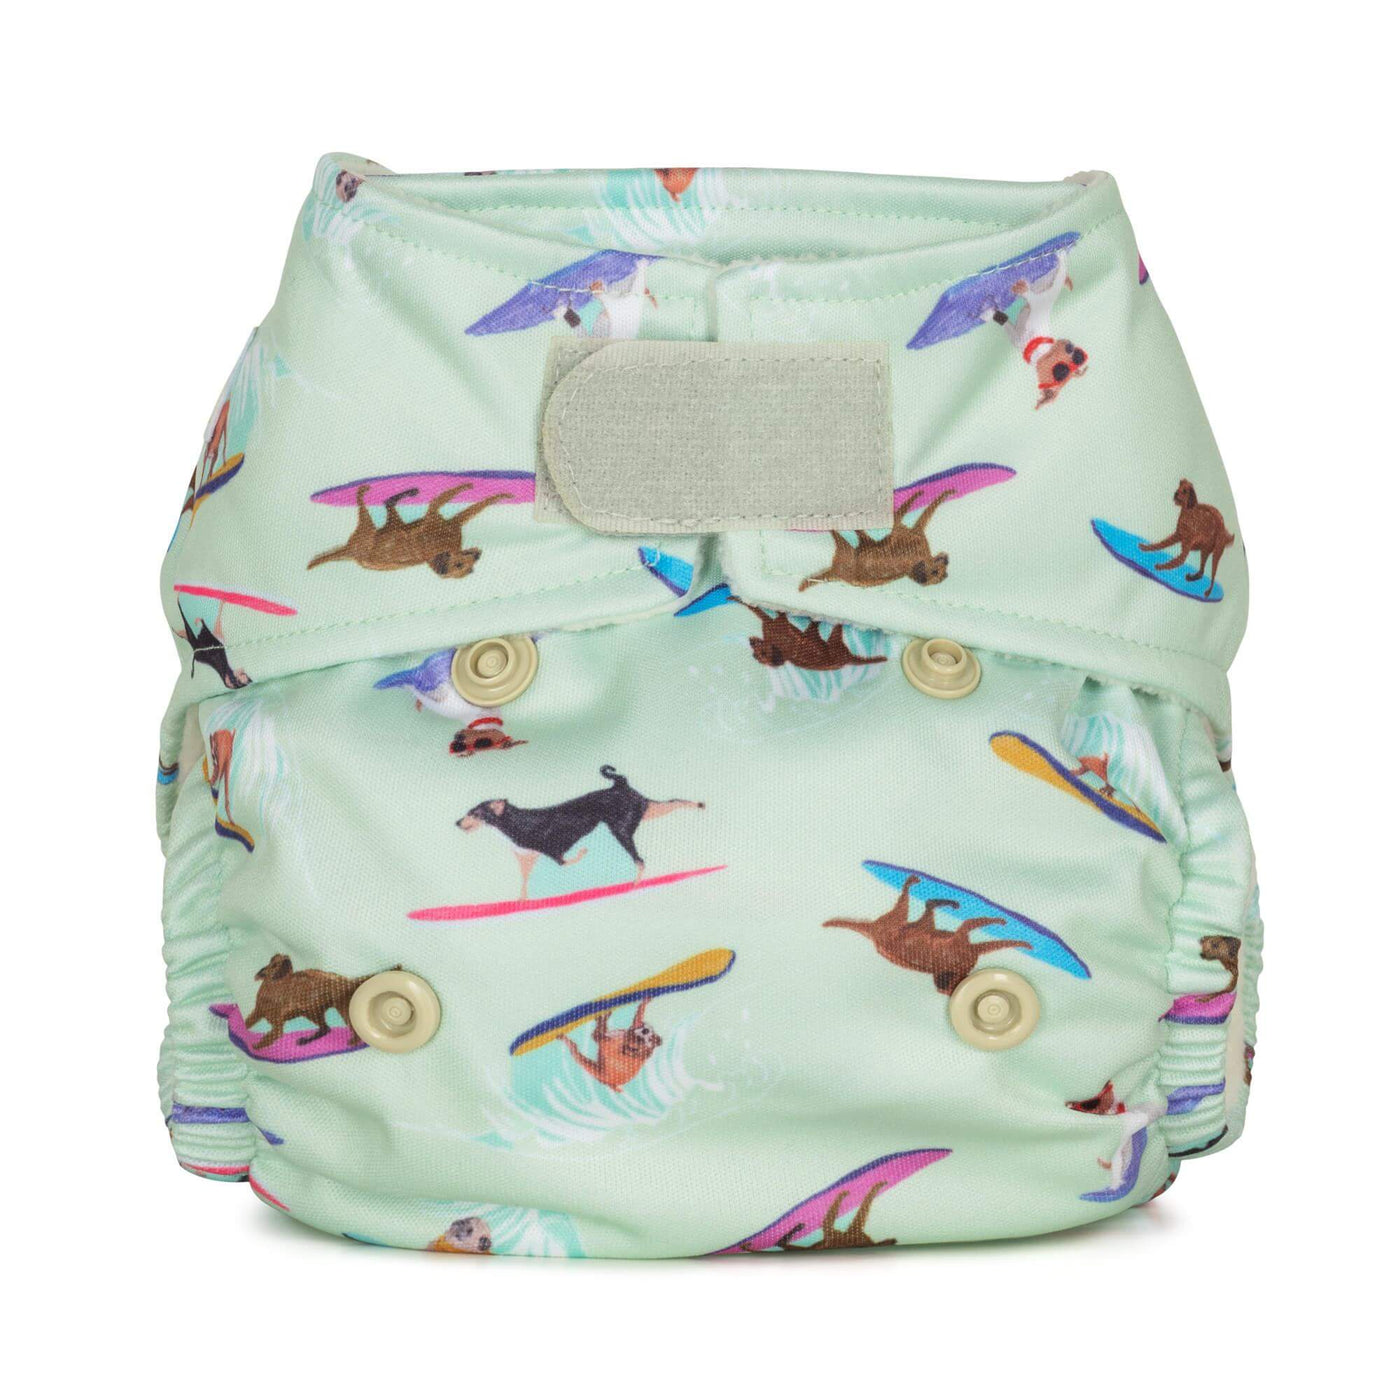 Baba + Boo Newborn Reusable Nappy - Prints Colour: Surfing Dogs reusable nappies all in one nappies Earthlets